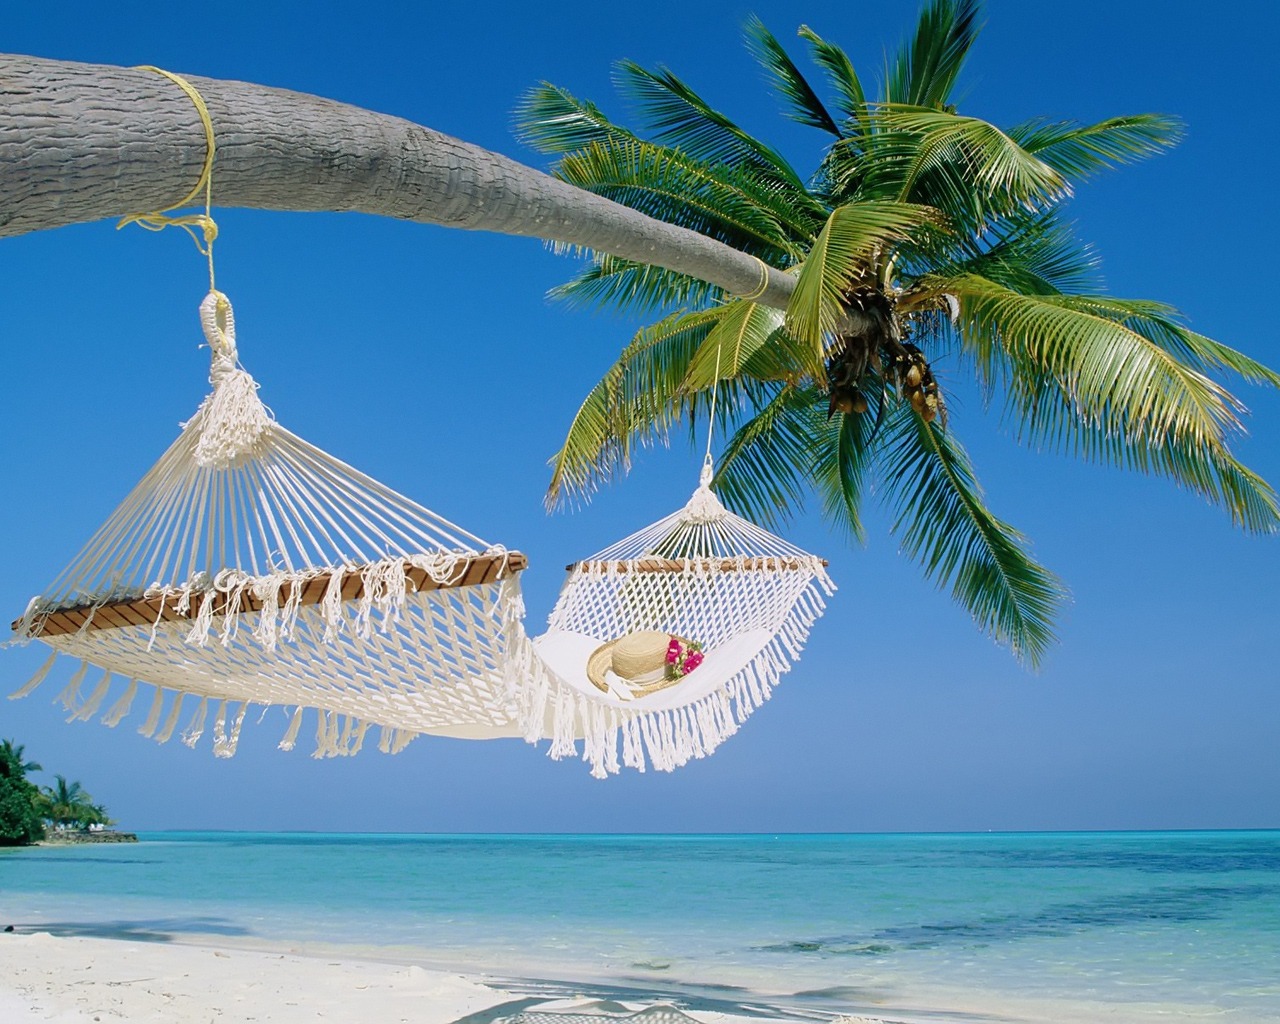 Hammock Wallpaper Beaches Nature Wallpapers in jpg format for free